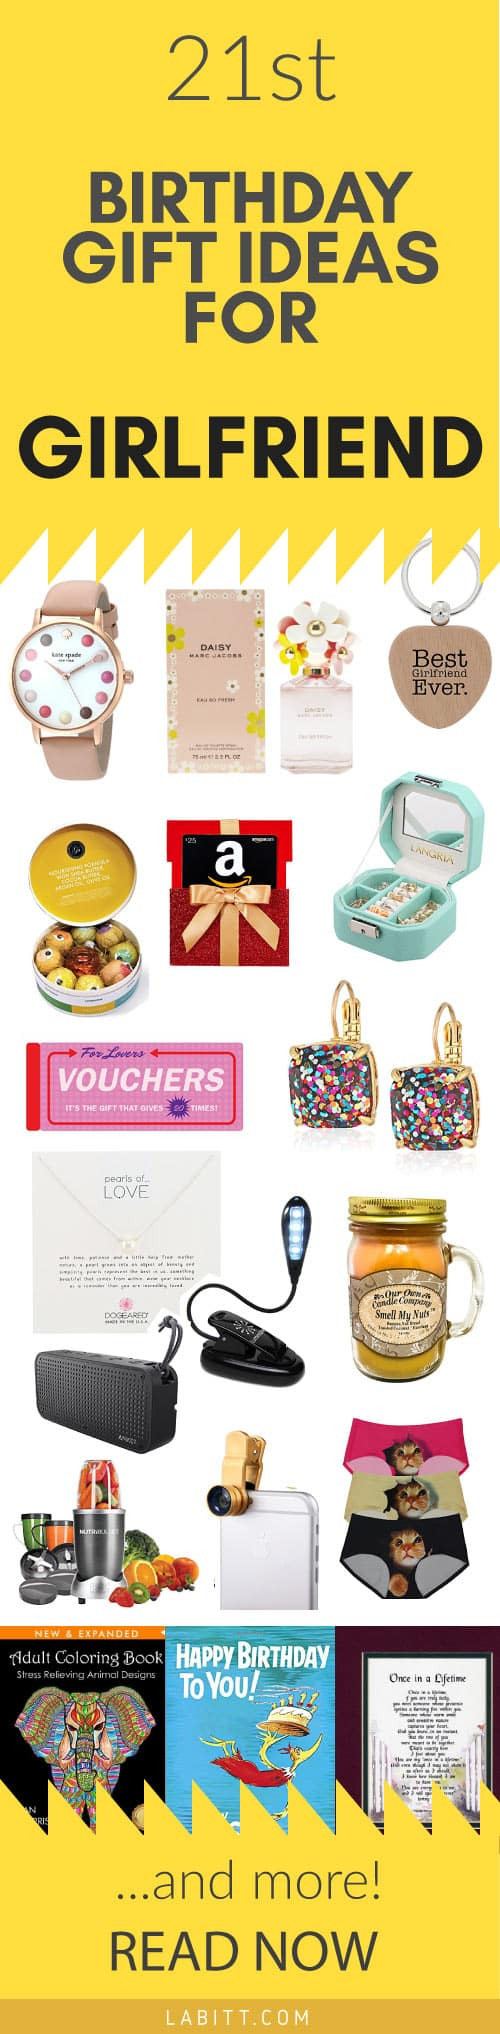 Amazing Gift Ideas For Girlfriend
 Creative 21st Birthday Gift Ideas for Girlfriend 21